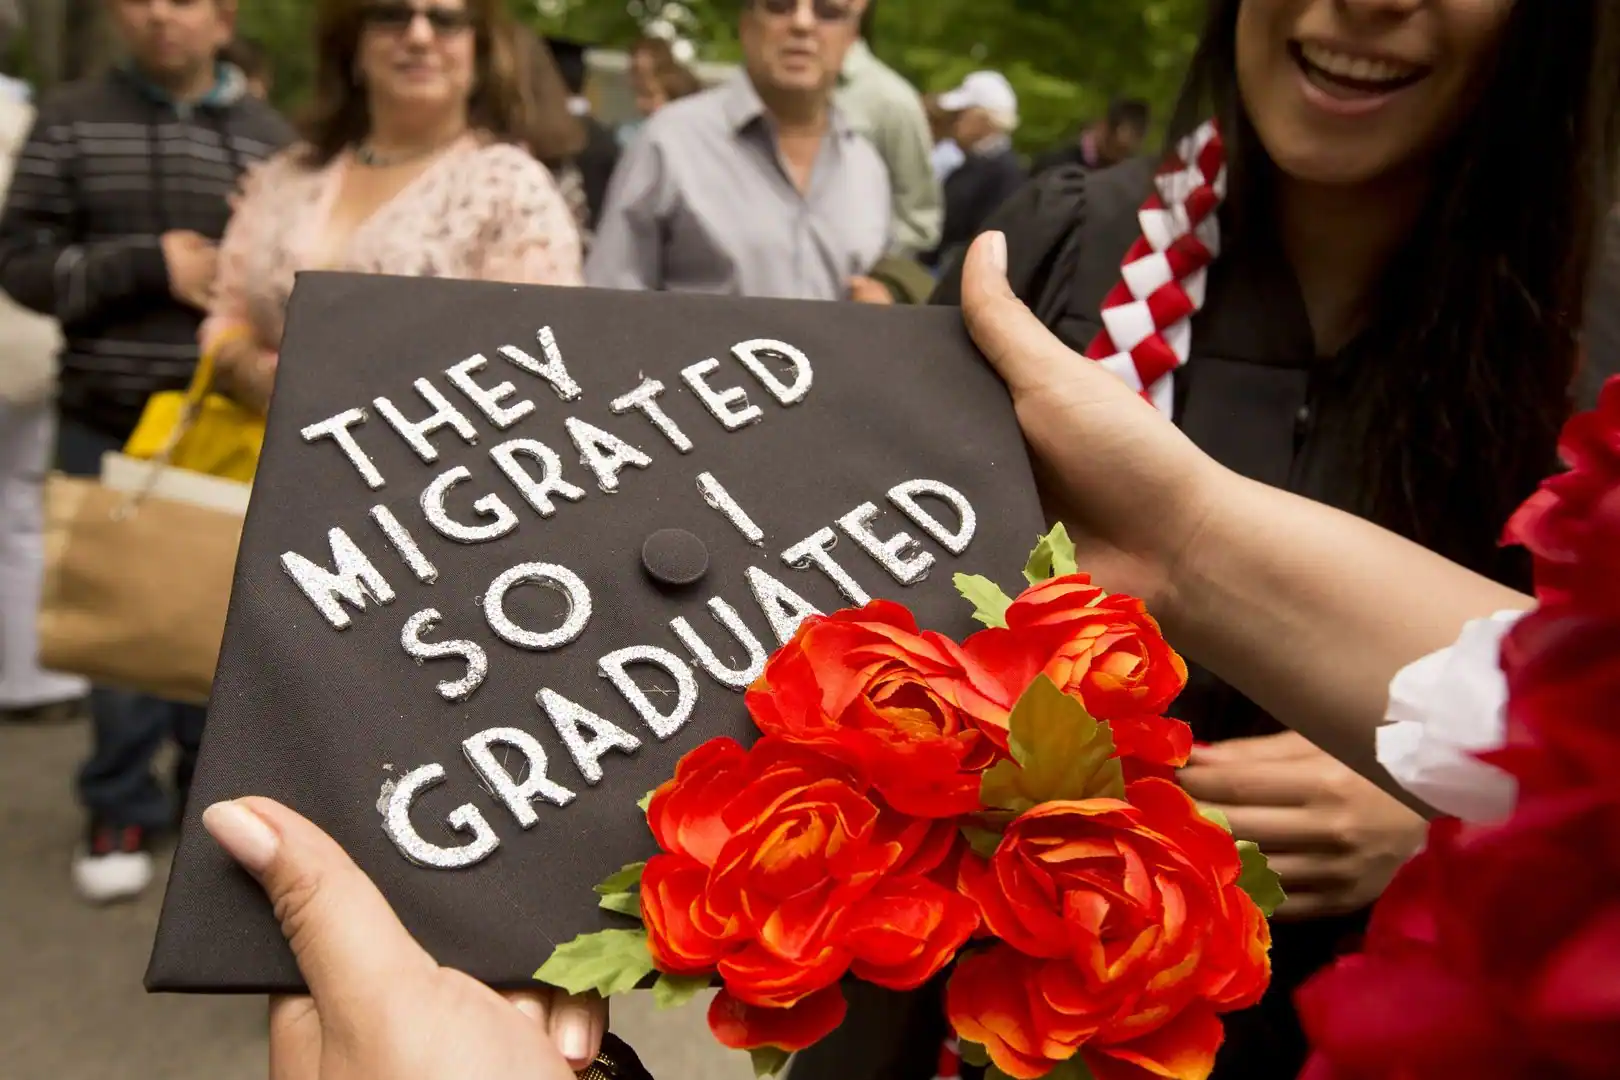 Yessenia Saucedo ’16 of Los Angelos holds her mortarboard after the ceremony. (Phyllis Graber Jensen/Bates College)